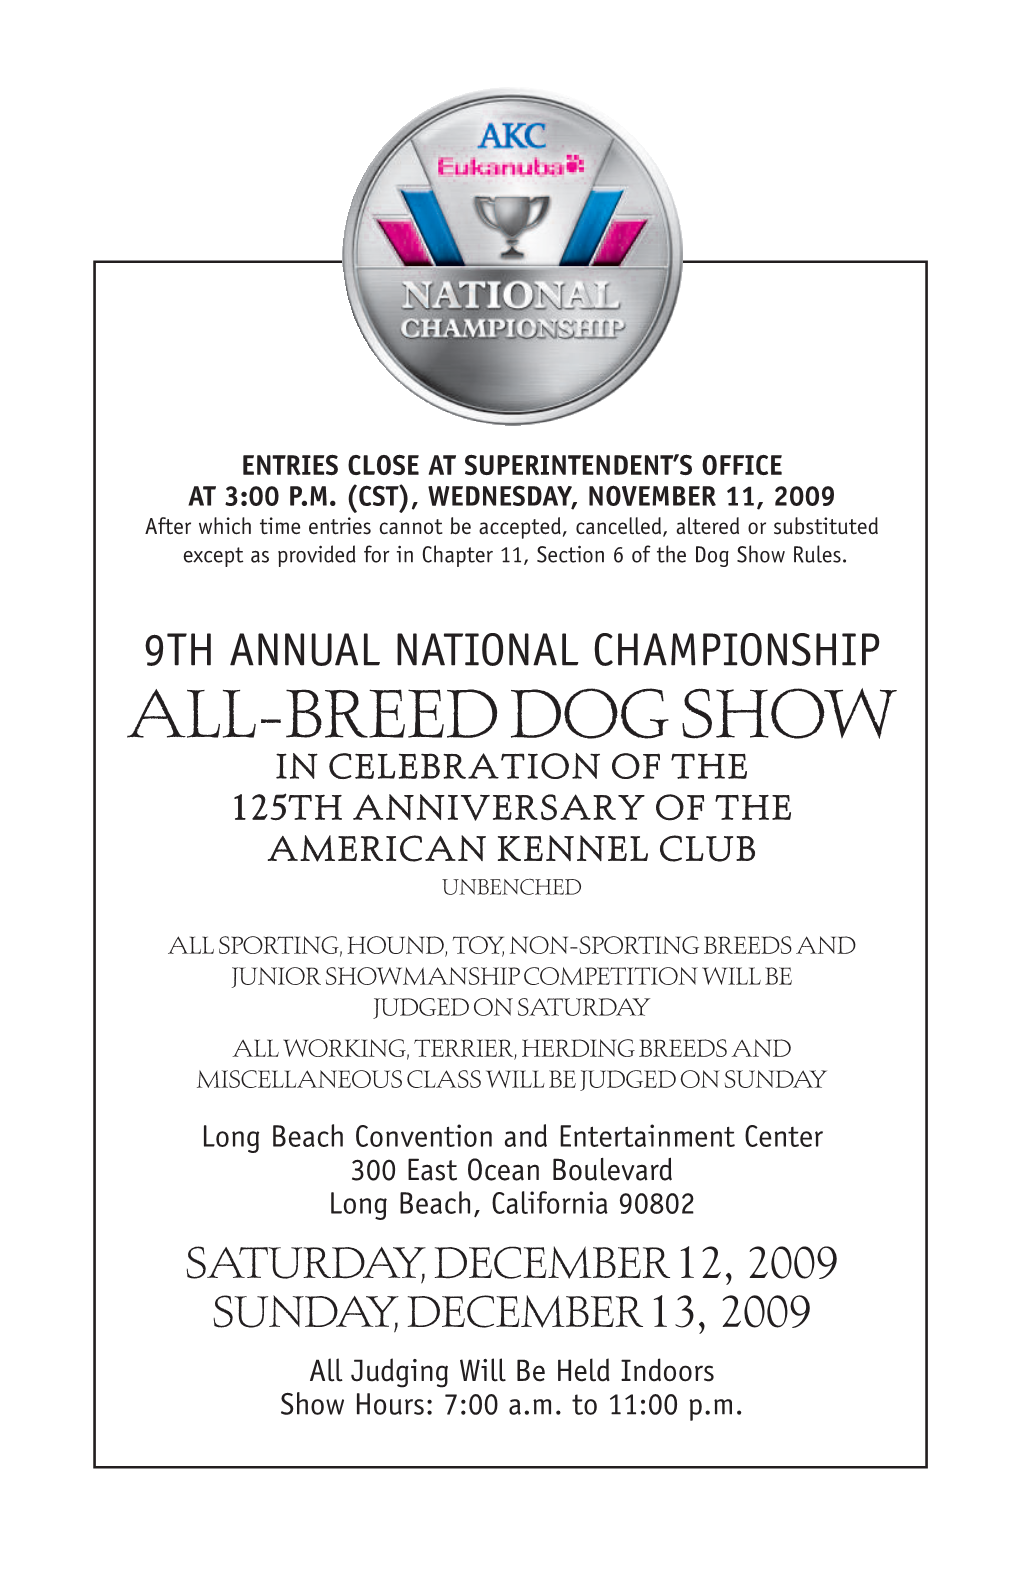 All-Breed Dog Show in Celebration of the 125Th Anniversary of the American Kennel Club Unbenched